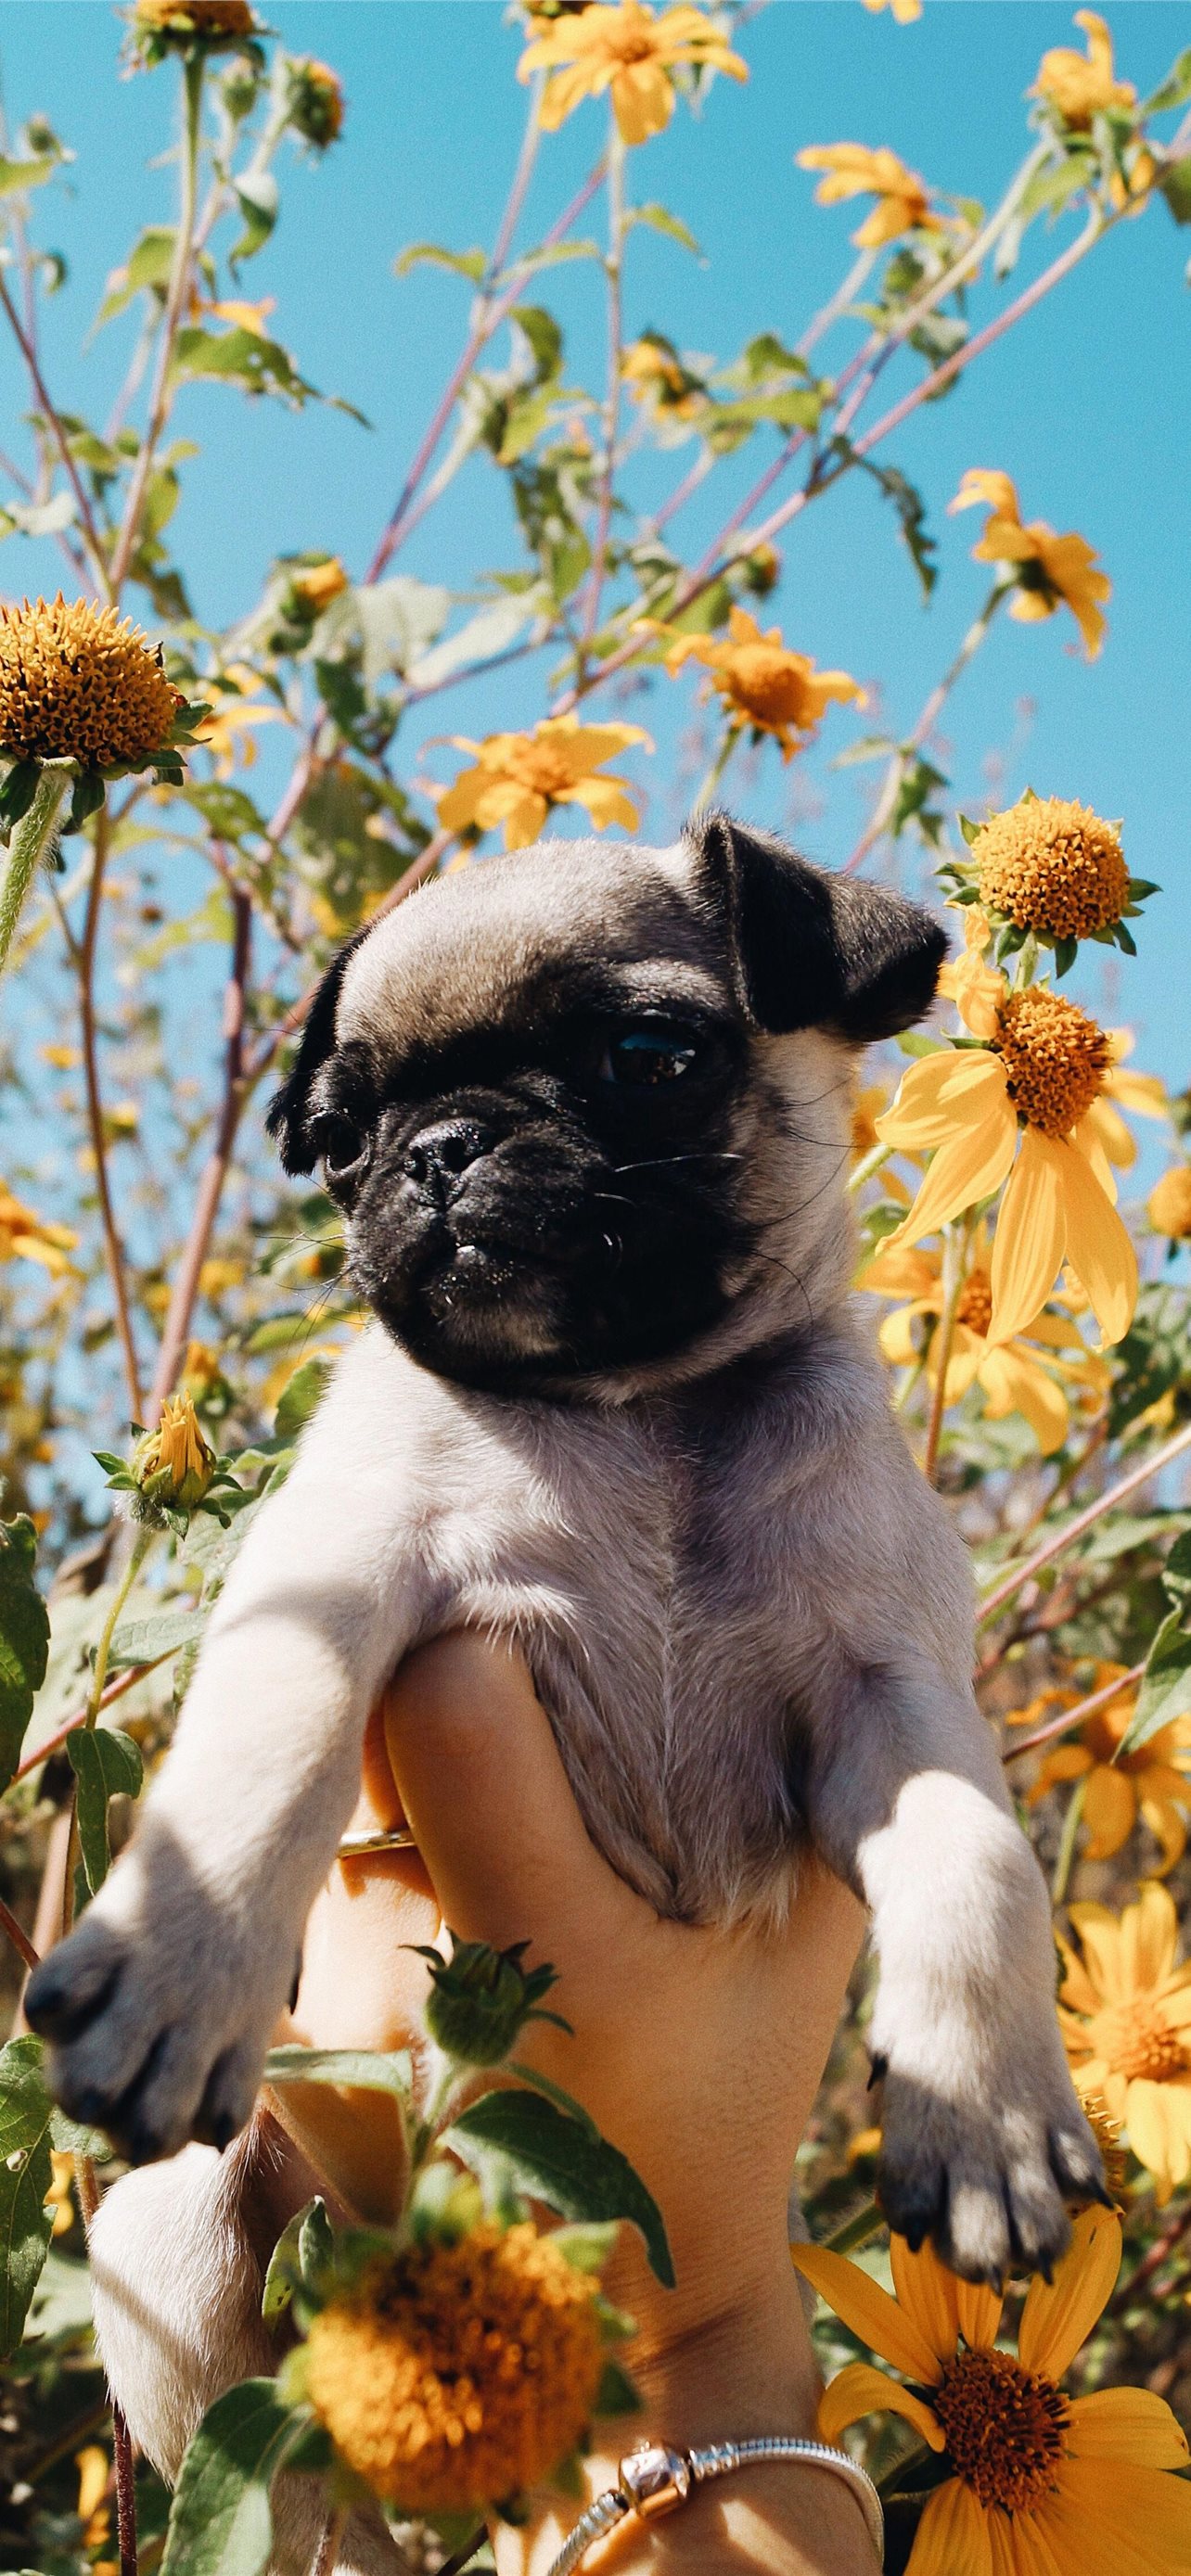 Flowers and Puppies on Dog iPhone Wallpapers Free Download